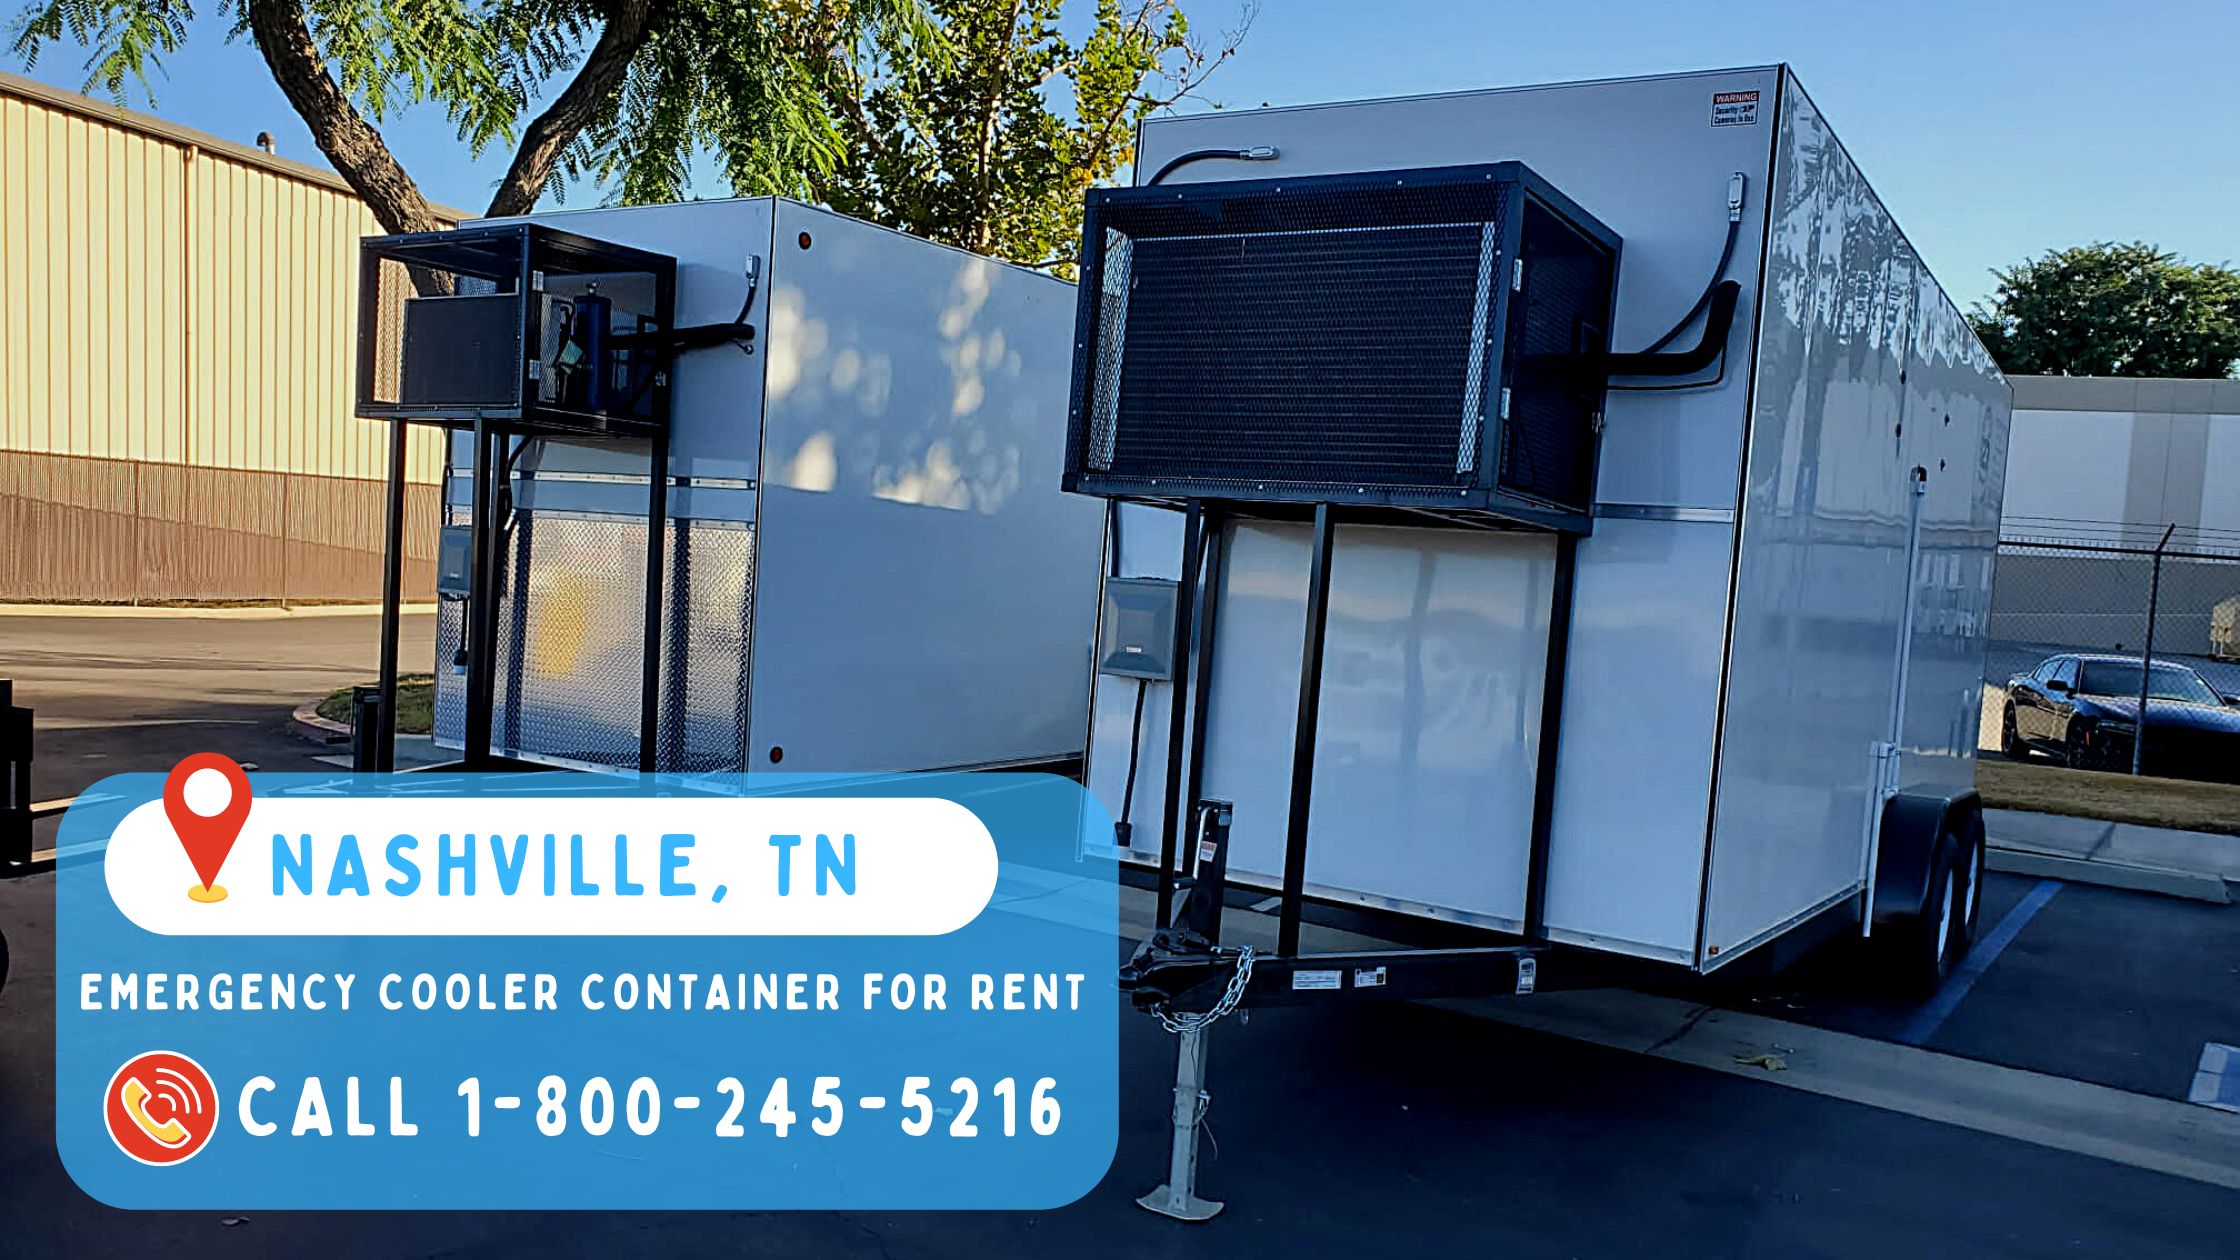 Emergency Cooler Container for Rent in Nashville